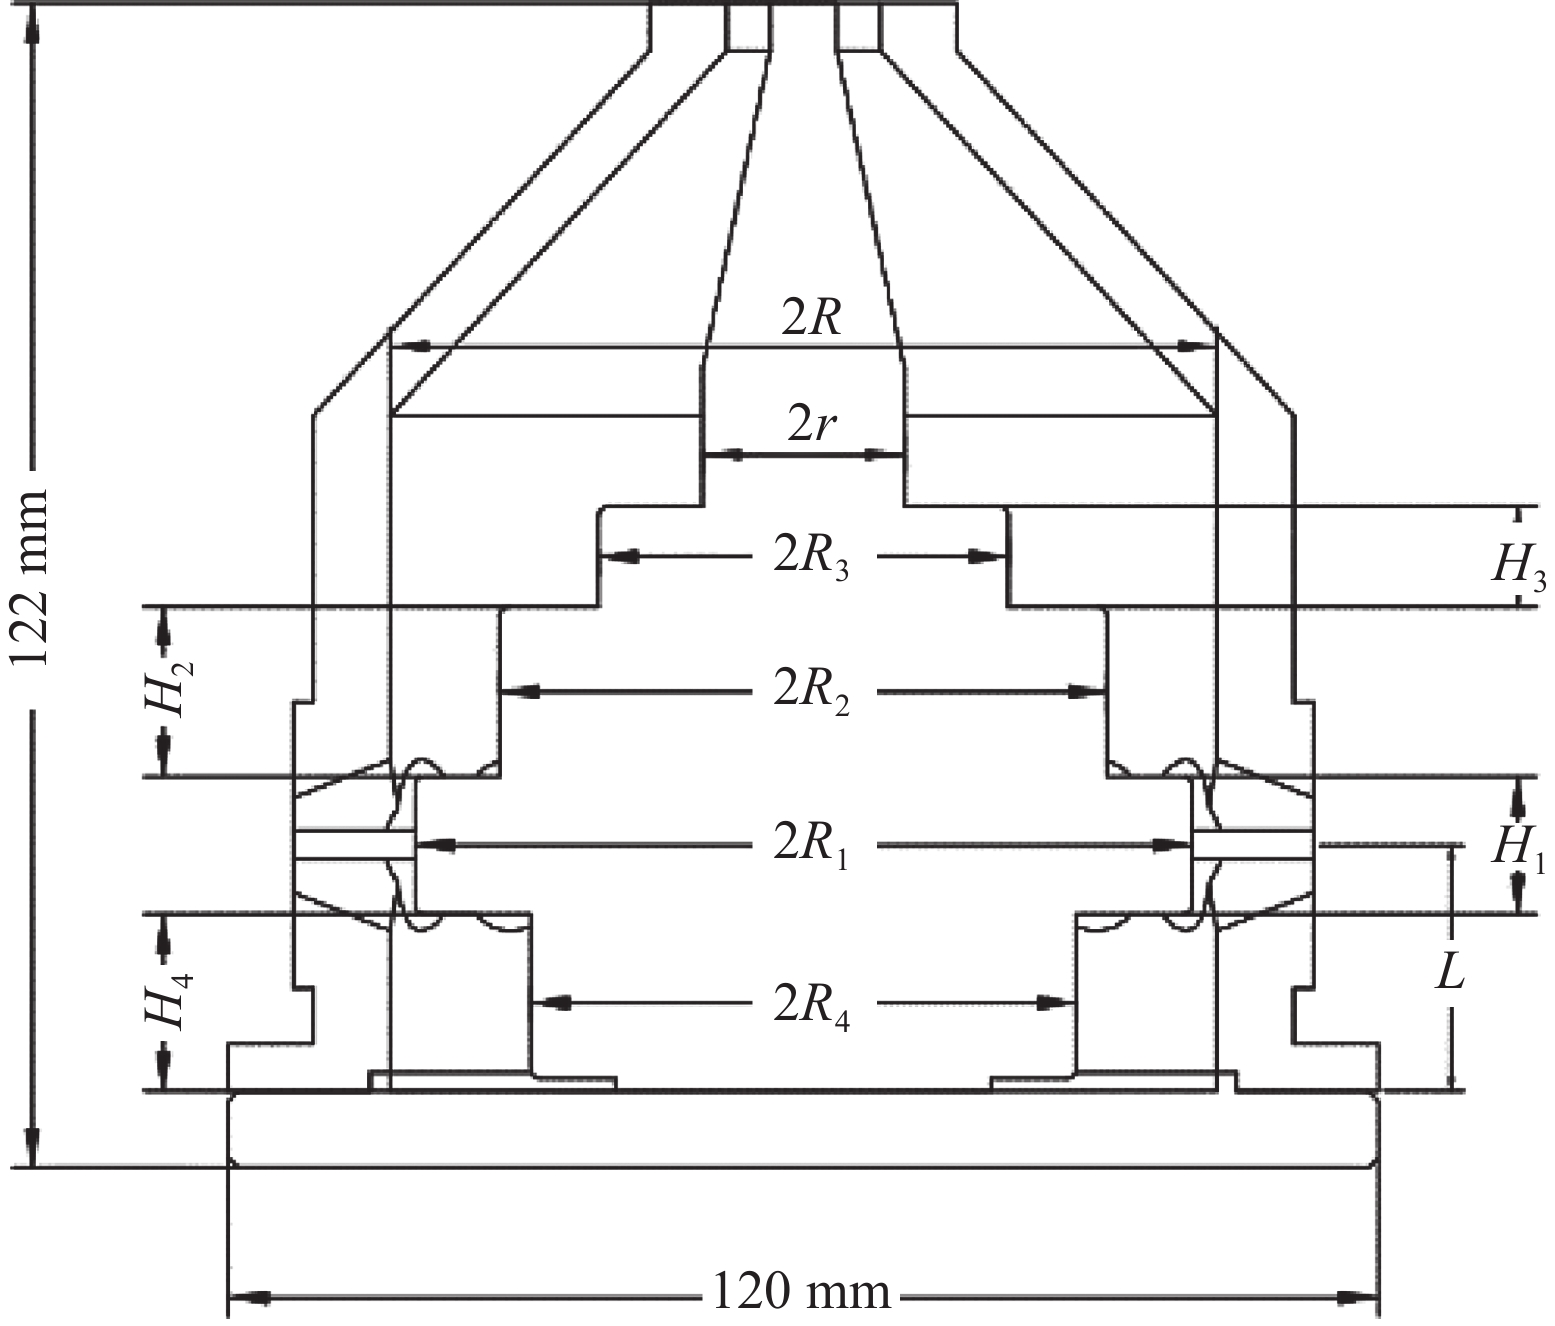 Structural parameters of power divider